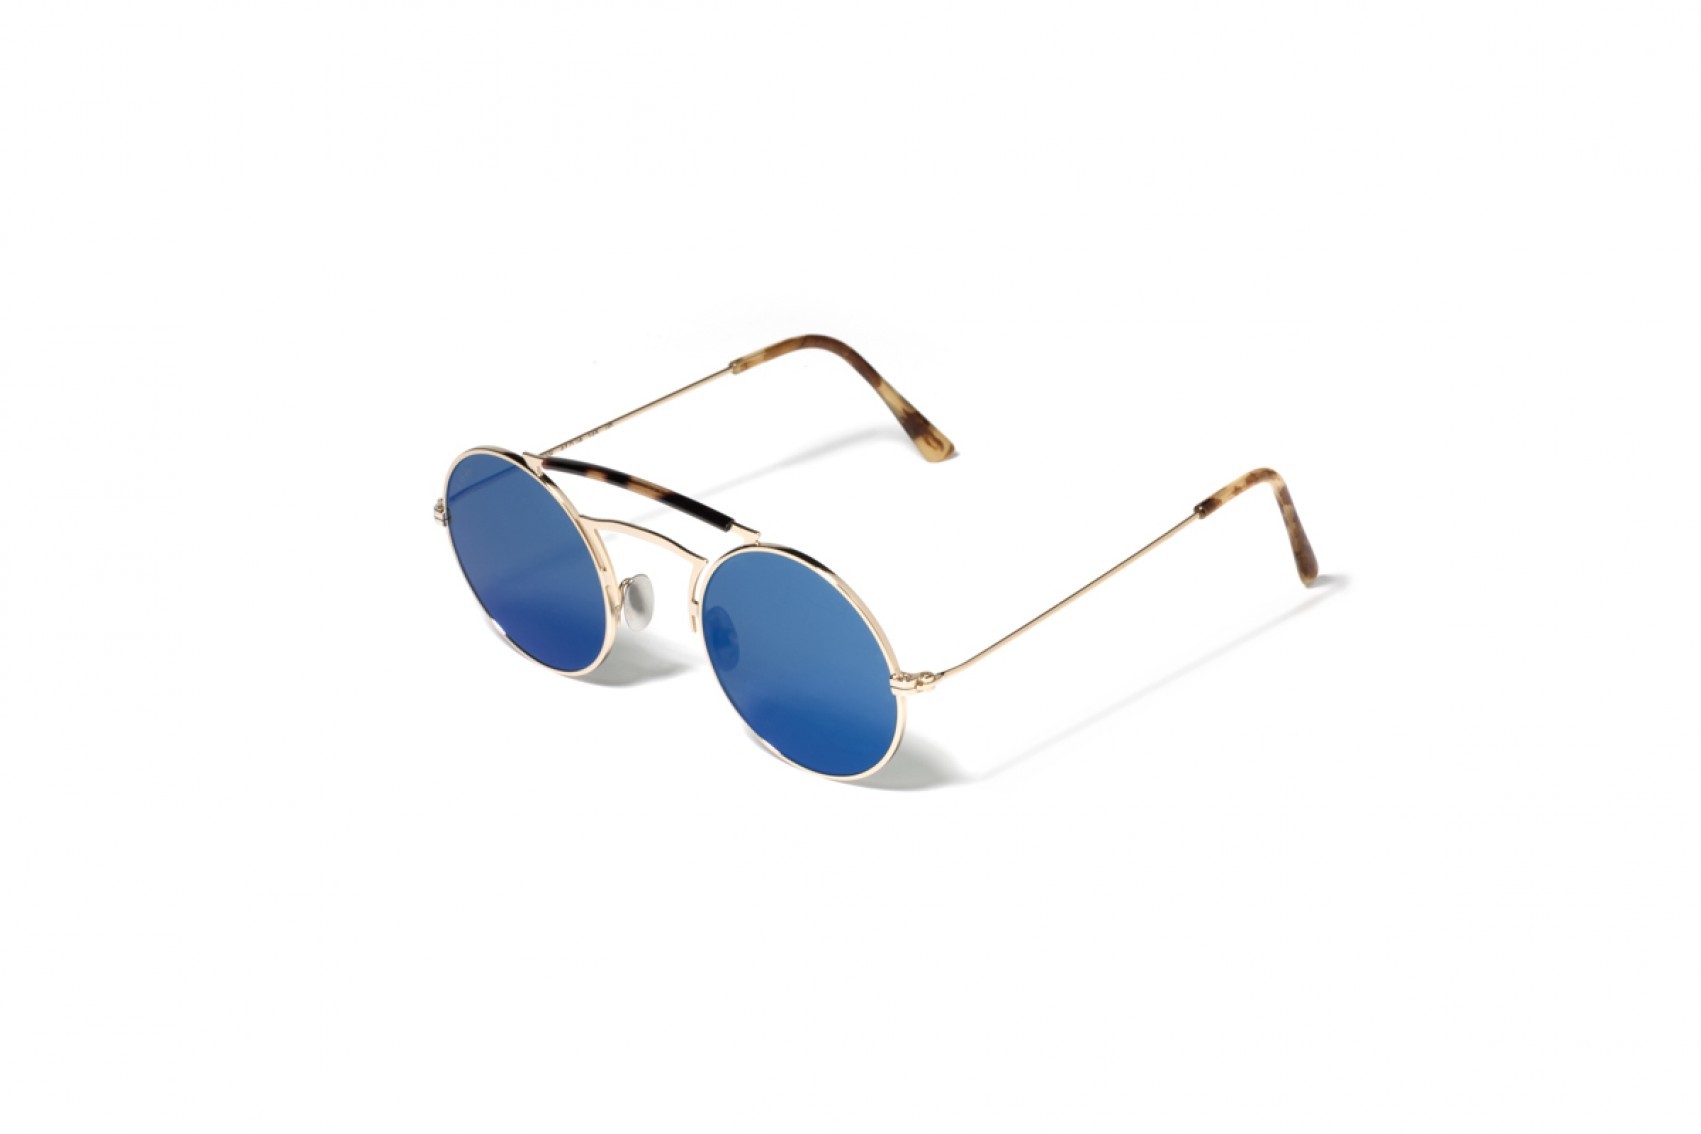 L.G.R SCARAB Gold 00 // Blue Mirror Polarized 2708 - New Collection 2018